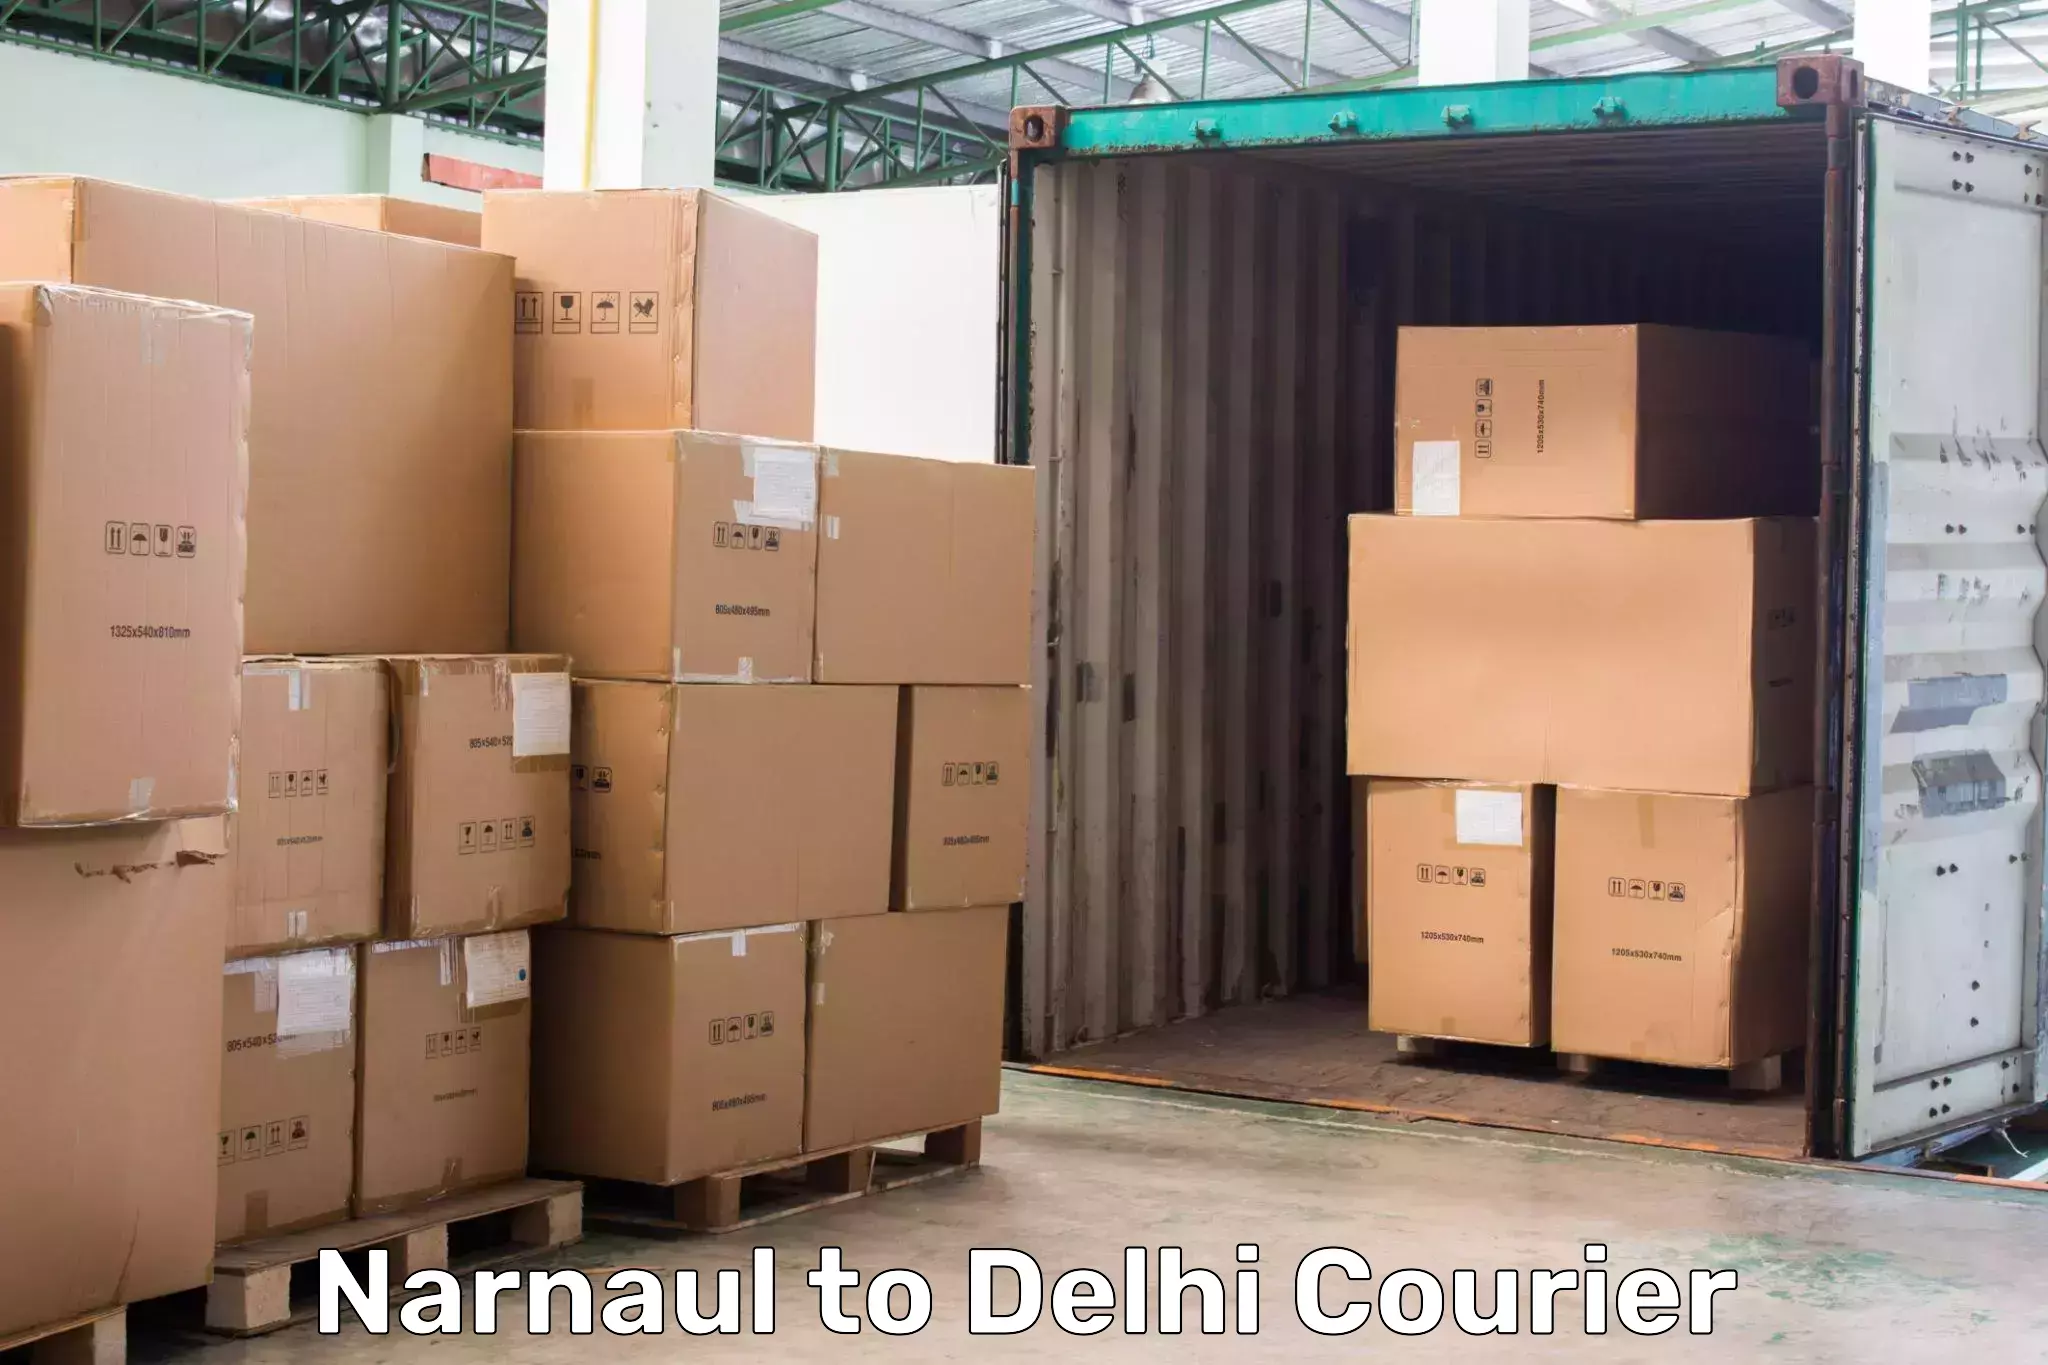 Local courier options Narnaul to Lodhi Road